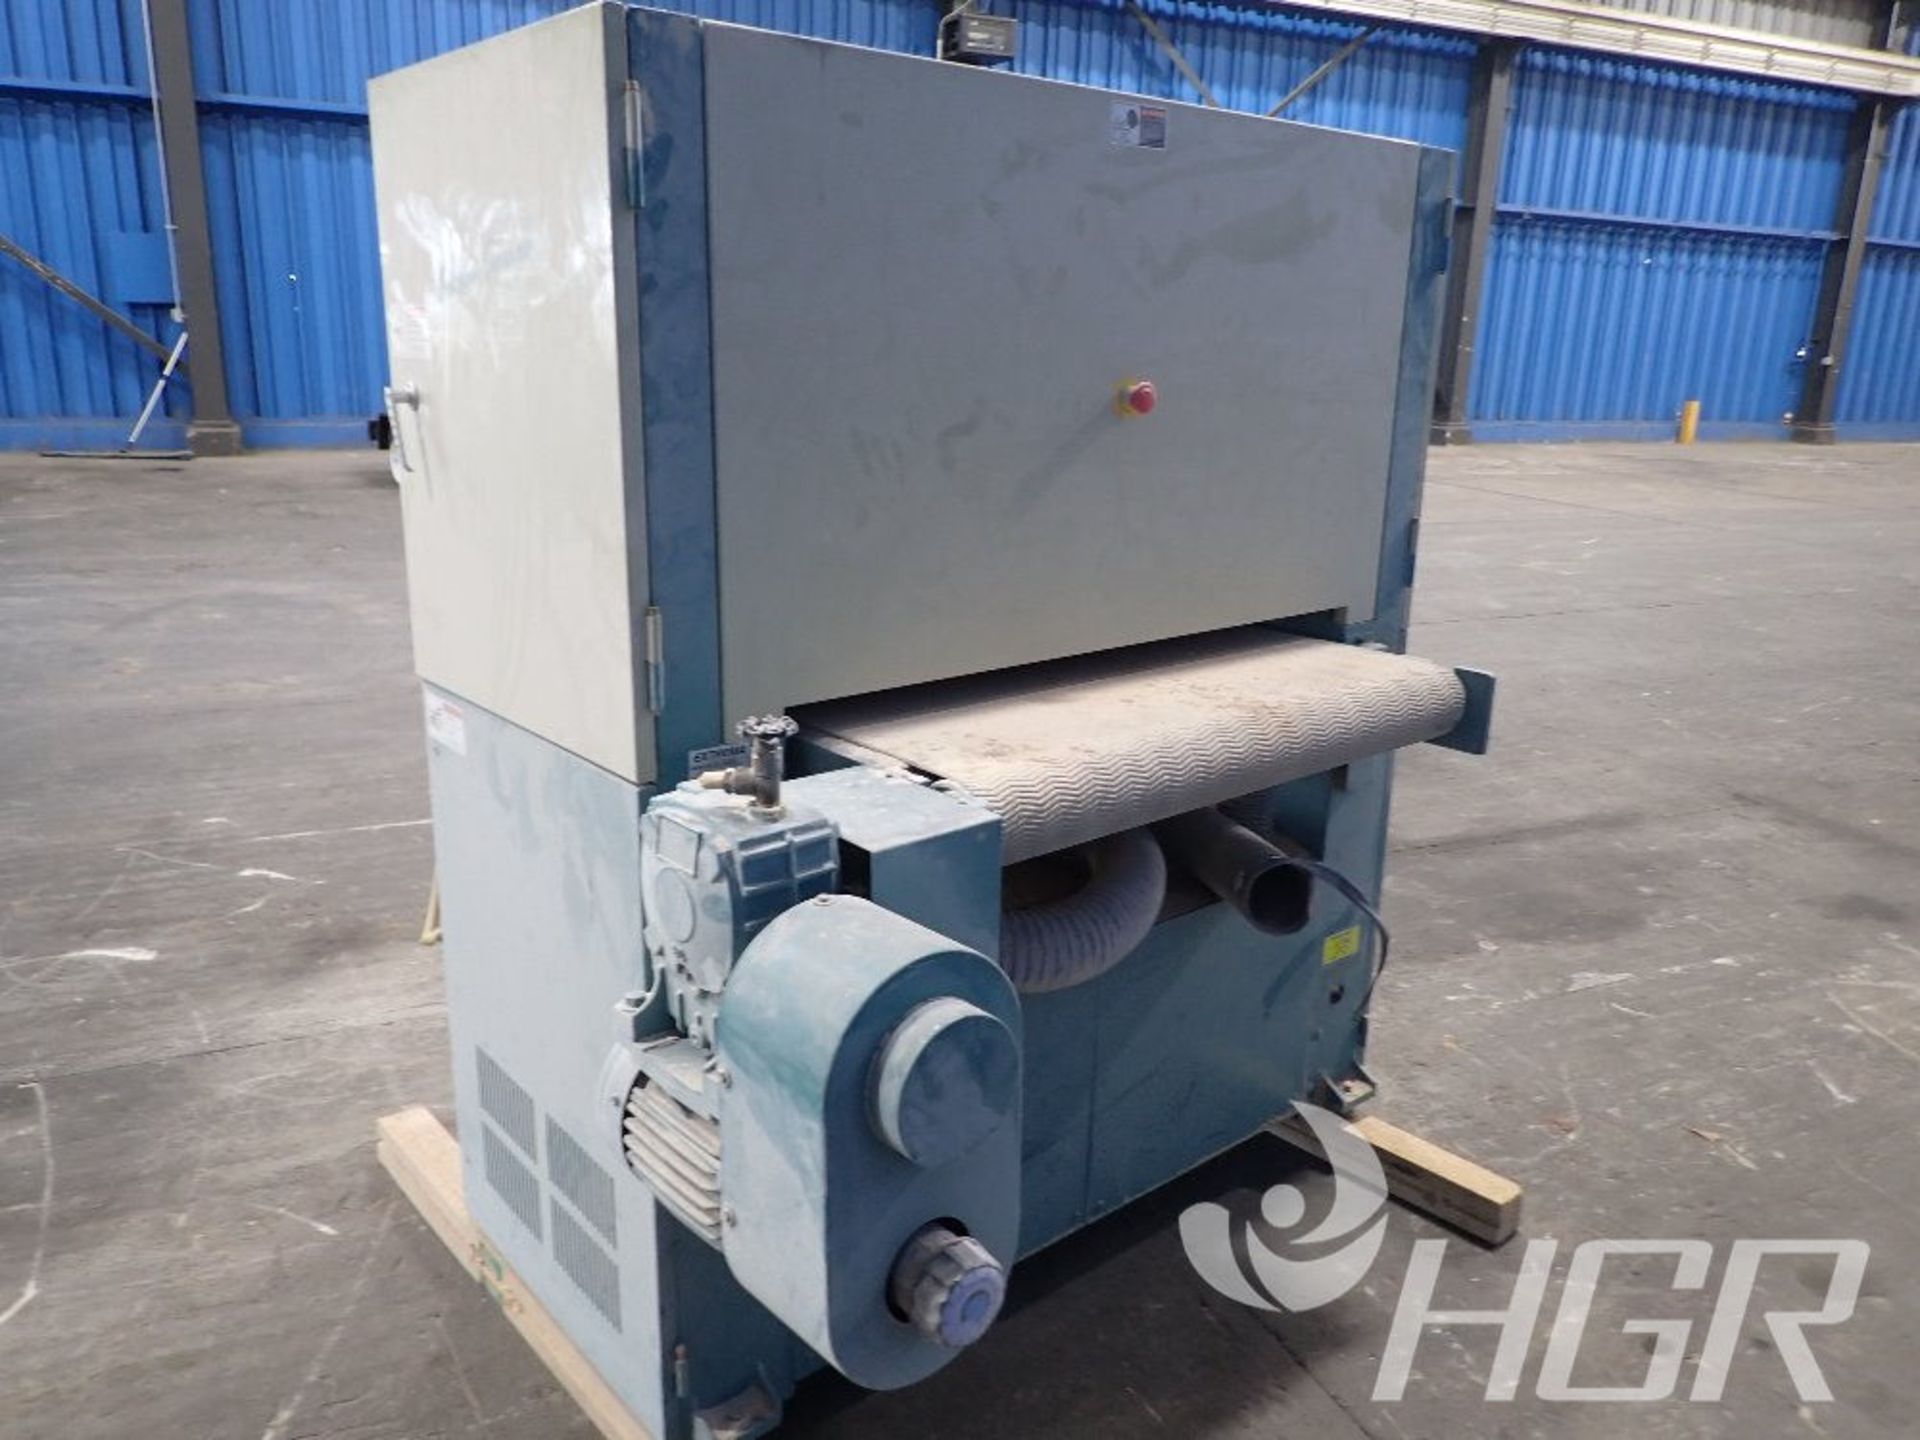 EXTREMA SANDER, Model XS-1A37/2, Date: 2008; s/n 2300804176, Approx. Capacity: 42X36, Power: n/a, - Image 10 of 13